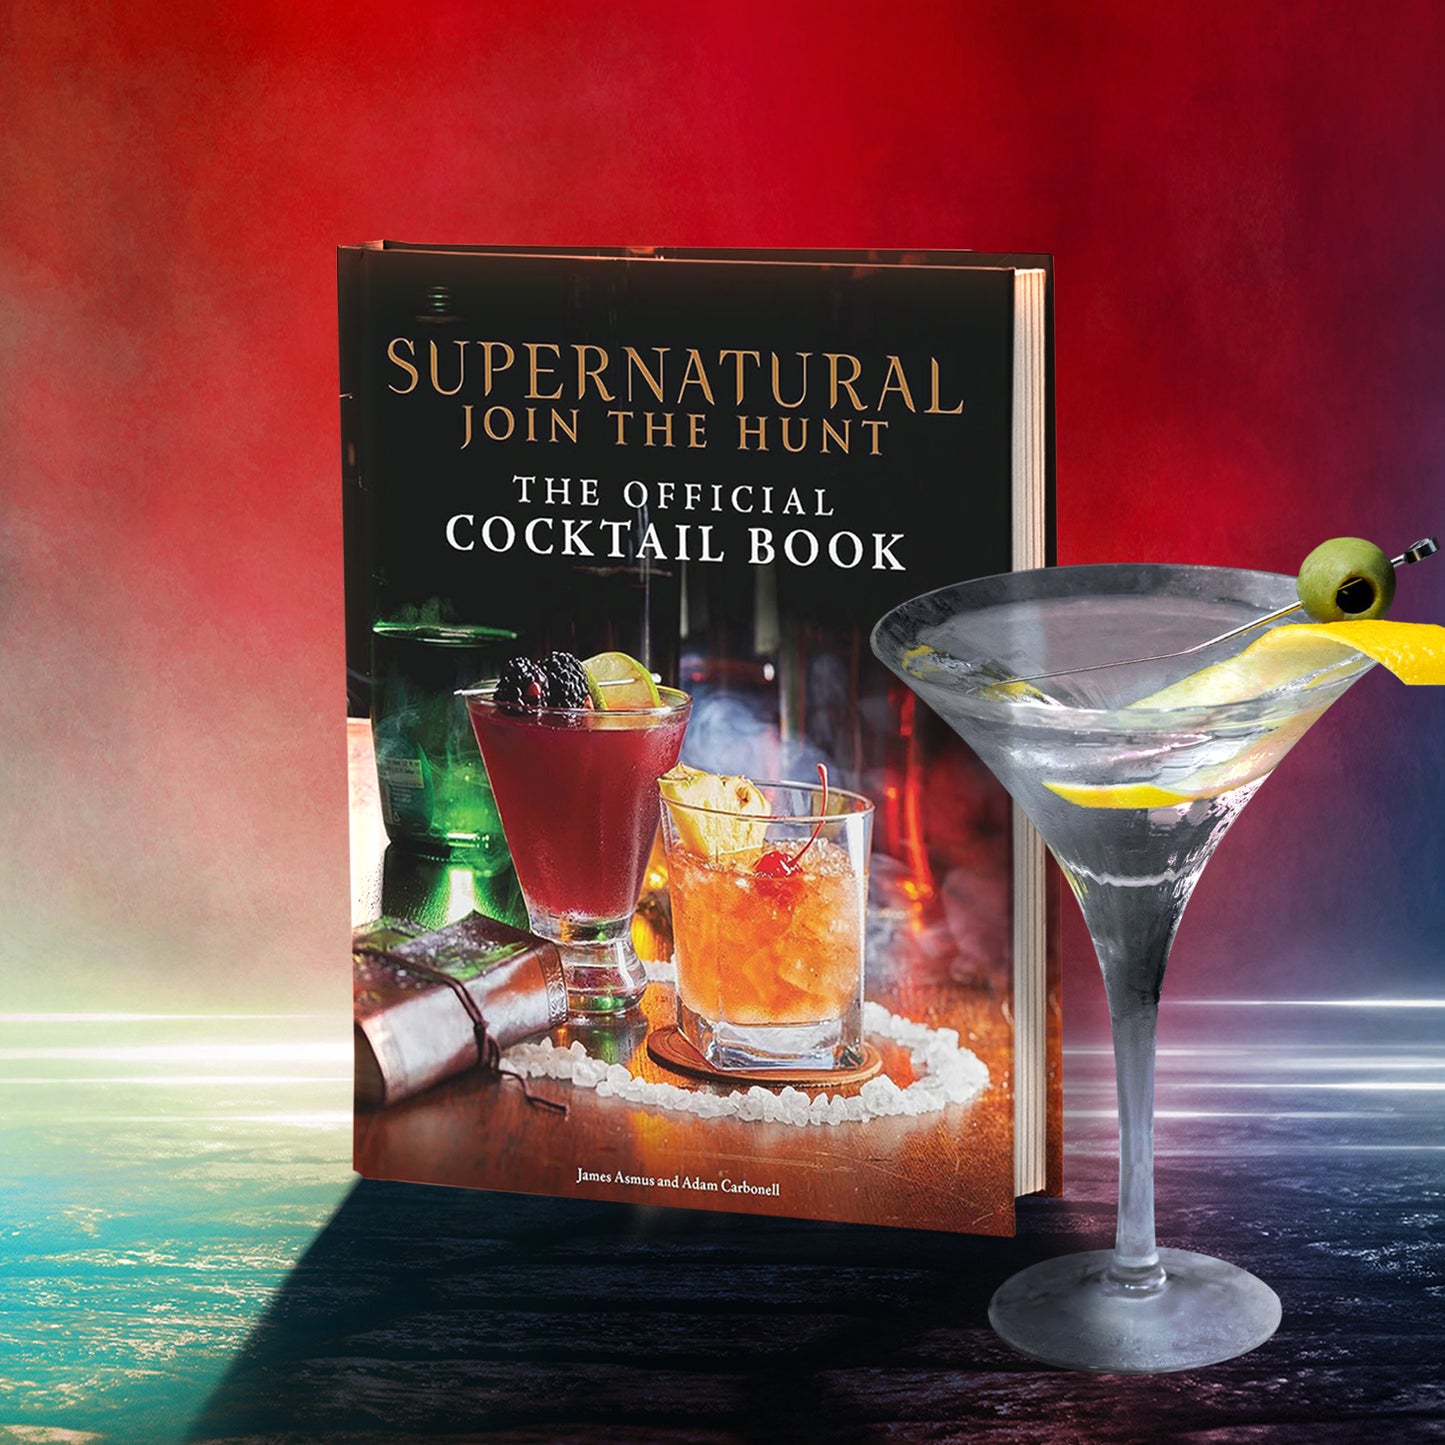 A book cover depicting various cocktails on a tabletop, sitting in a circle of salt crystals, against a red and green backdrop. Next to the book is a martini glass with an olive and lemon peel on the rim. At the top is gold text reading "Supernatural, Join the hunt." Below that in white text is "The official Cocktail Book."